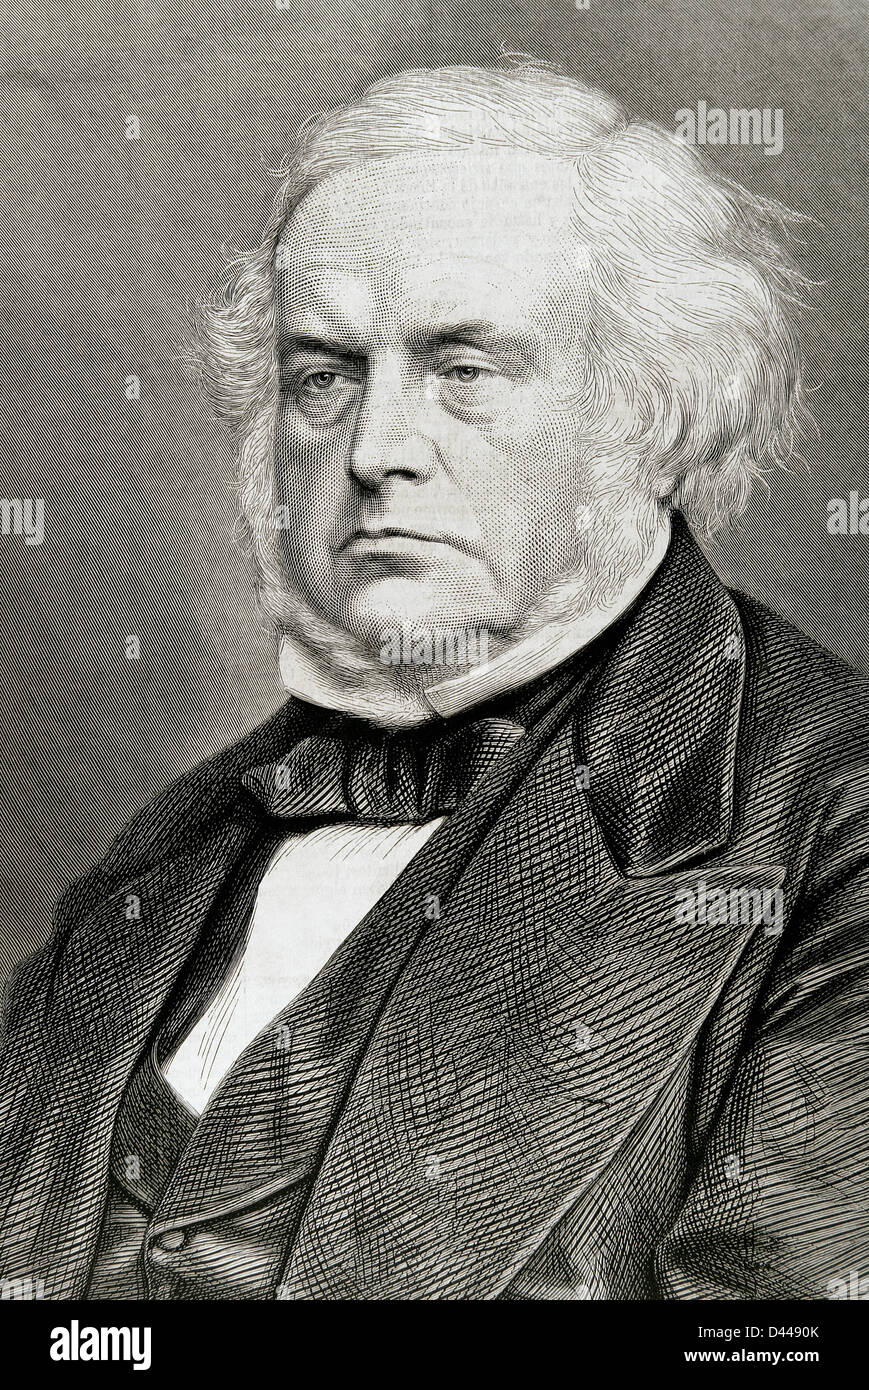 John Bright (1811-1889). British politician, member of the Liberal Party. Engraving. Stock Photo